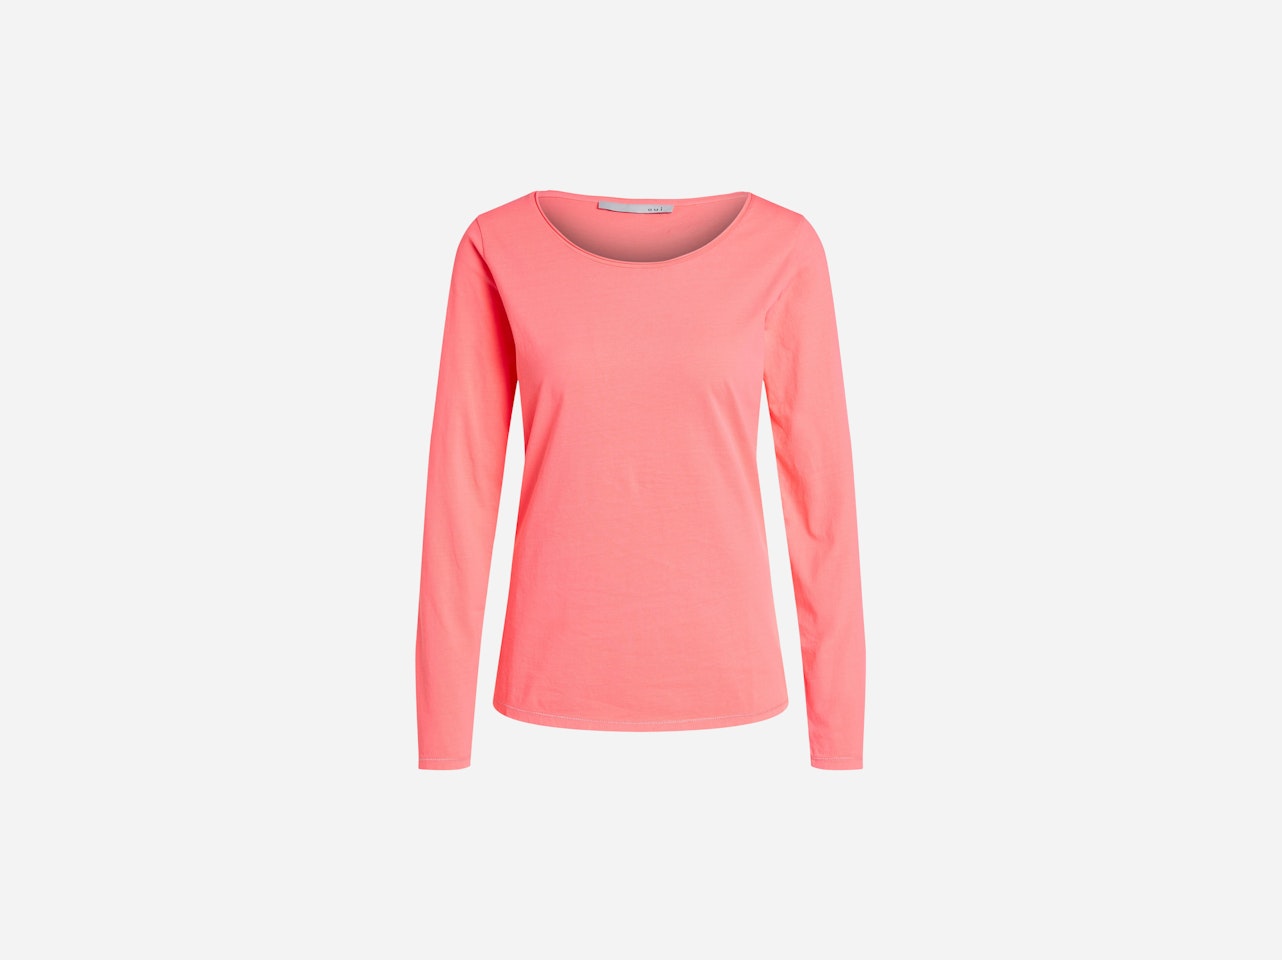 Bild 7 von Long-sleeved shirt made from organic cotton in pink | Oui